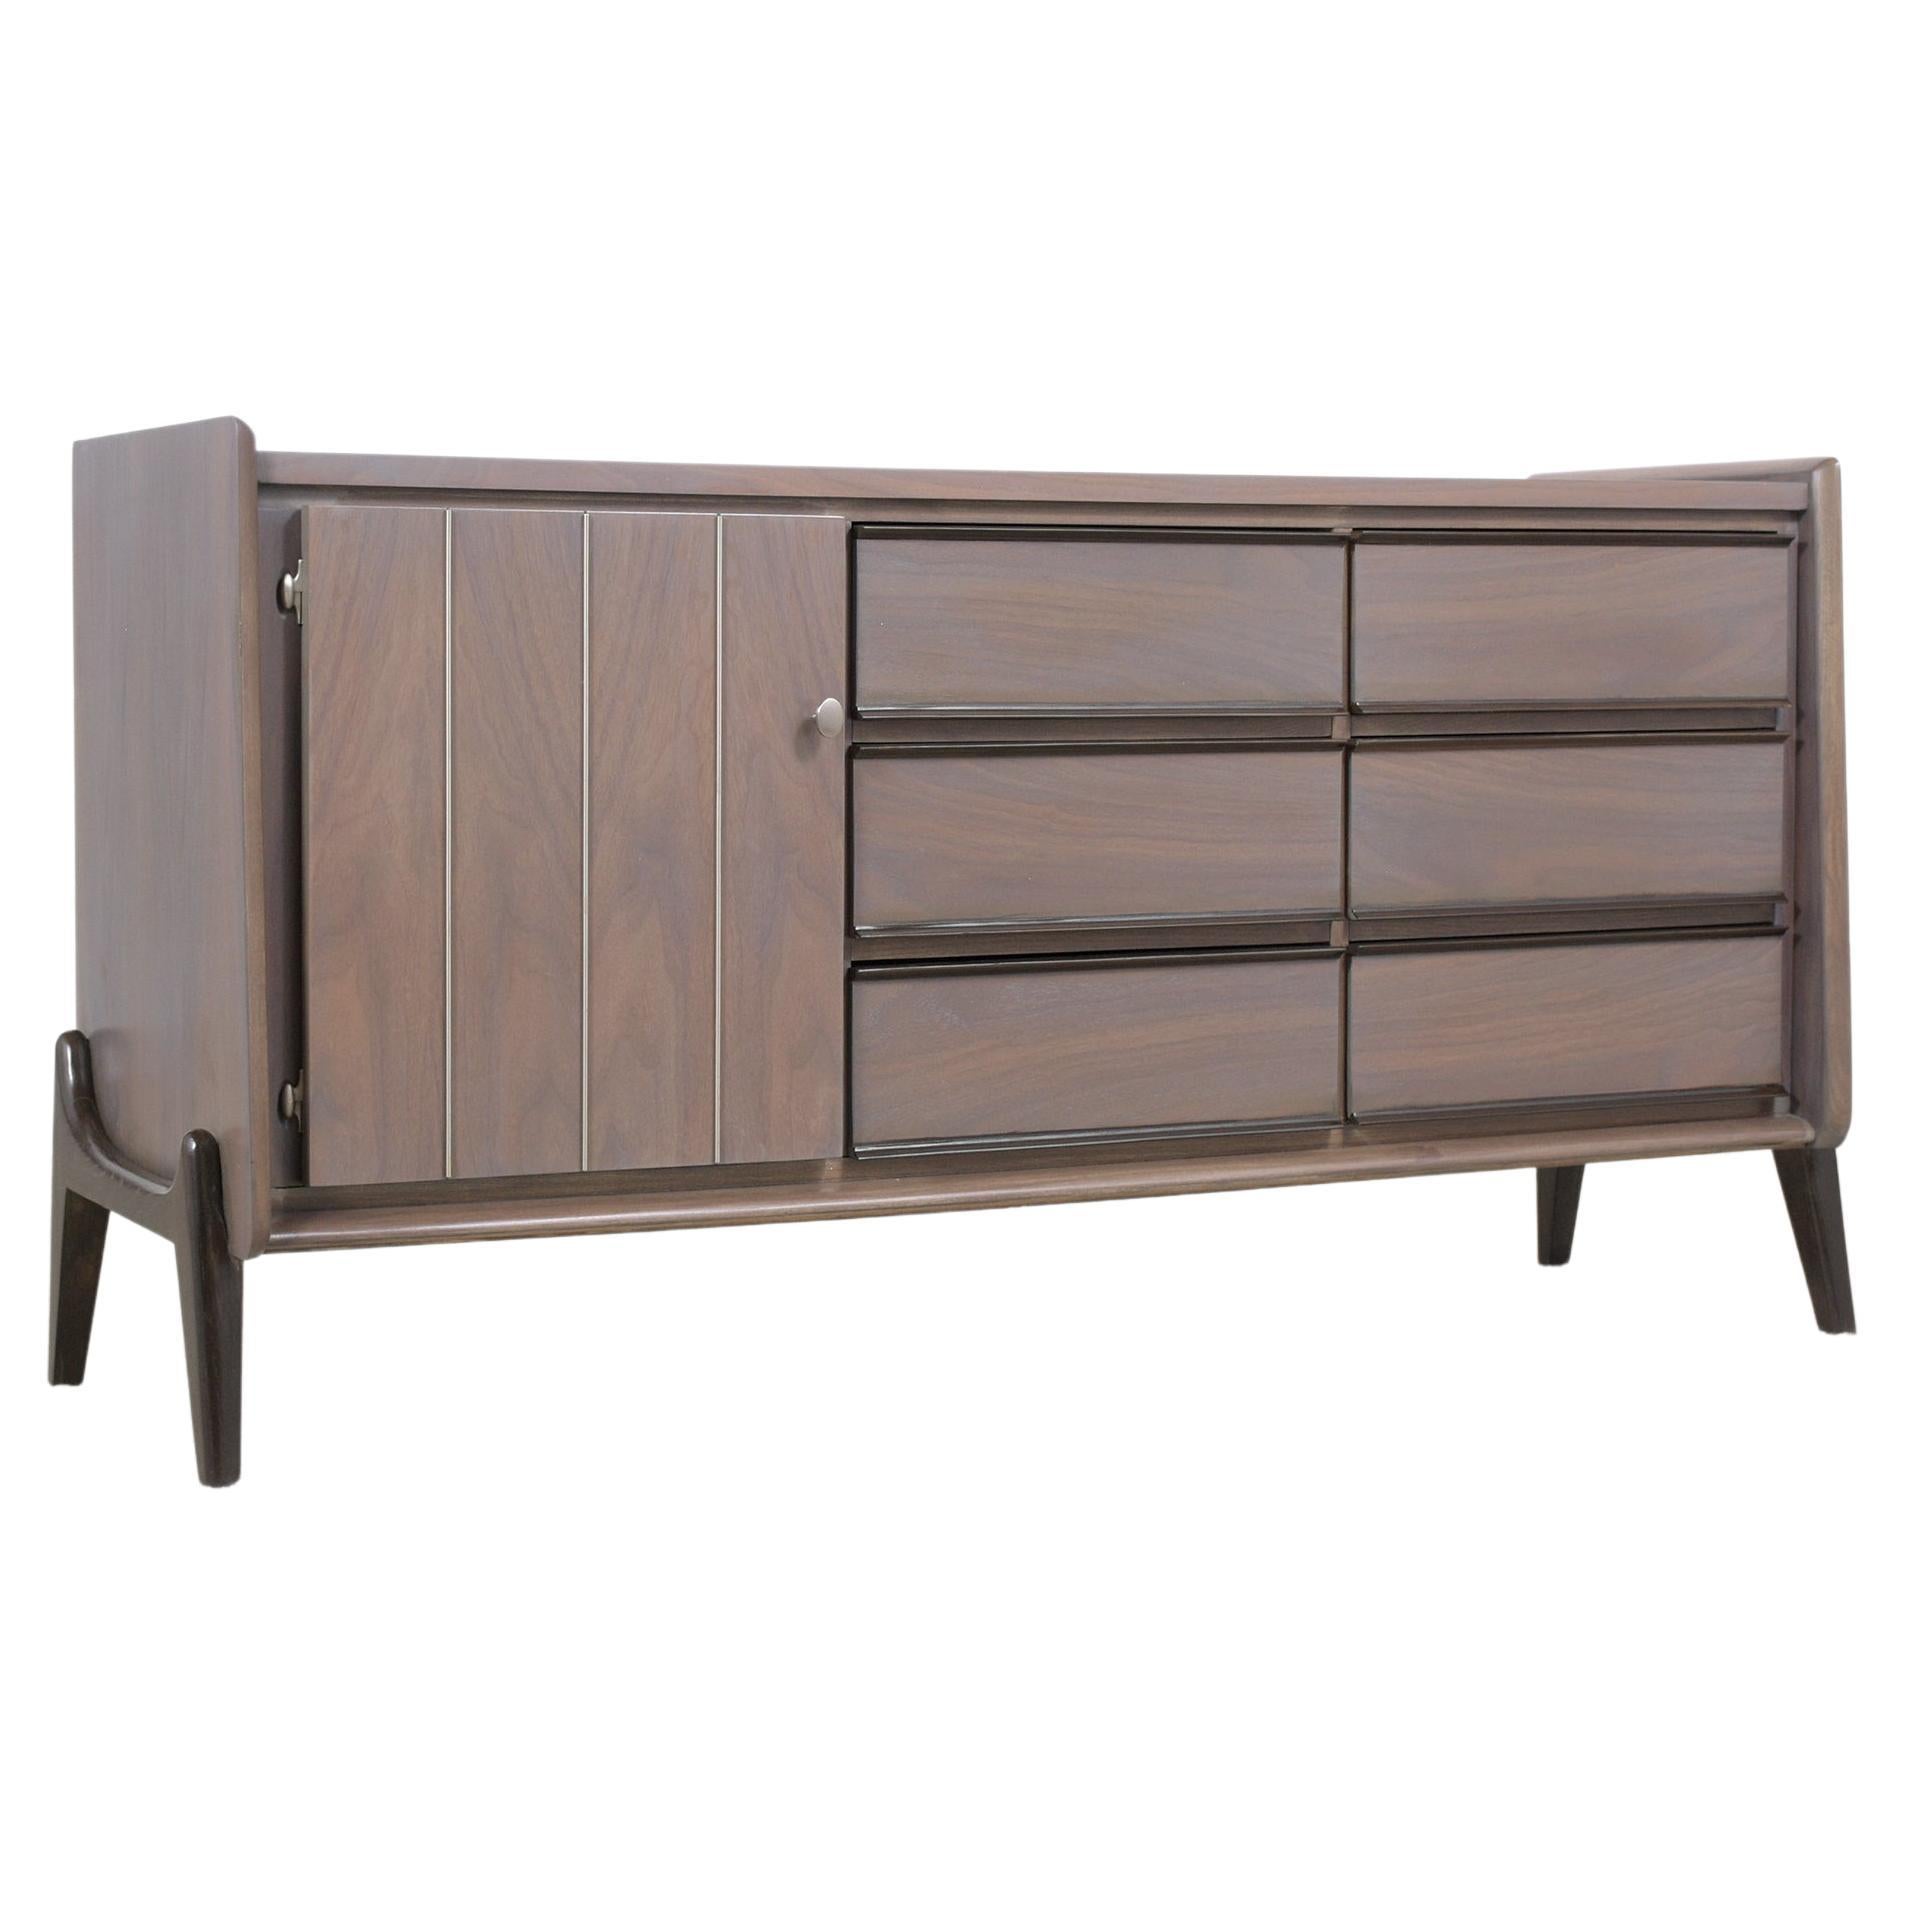 1960s Mid-Century Modern Lacquered Credenza